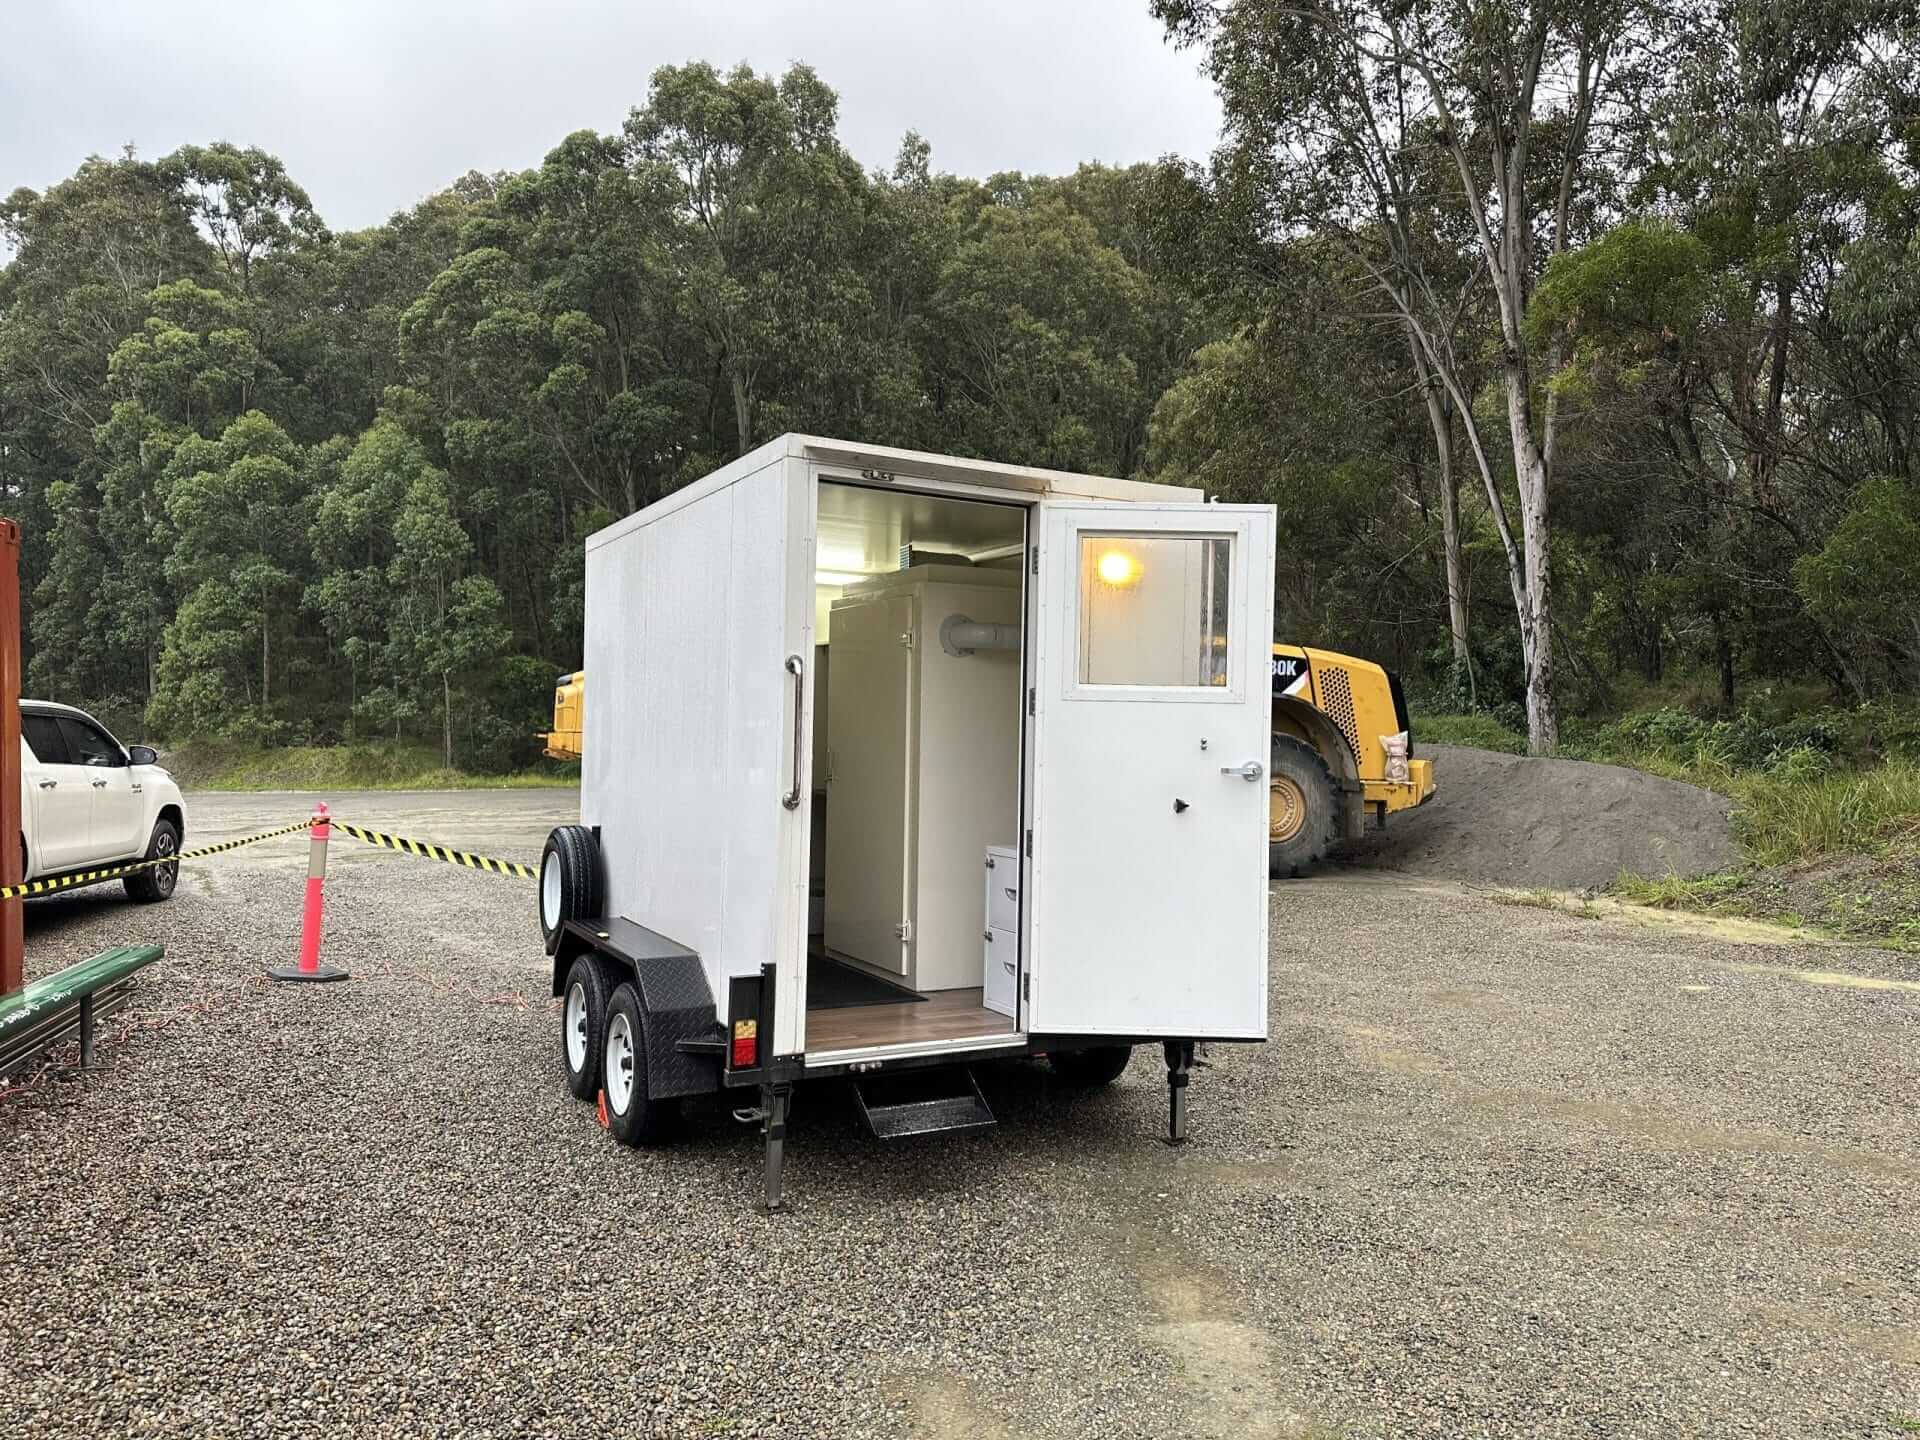 A small trailer with a toilet inside, suitable for Asbestos Testing and E. coli & Coliforms Testing.